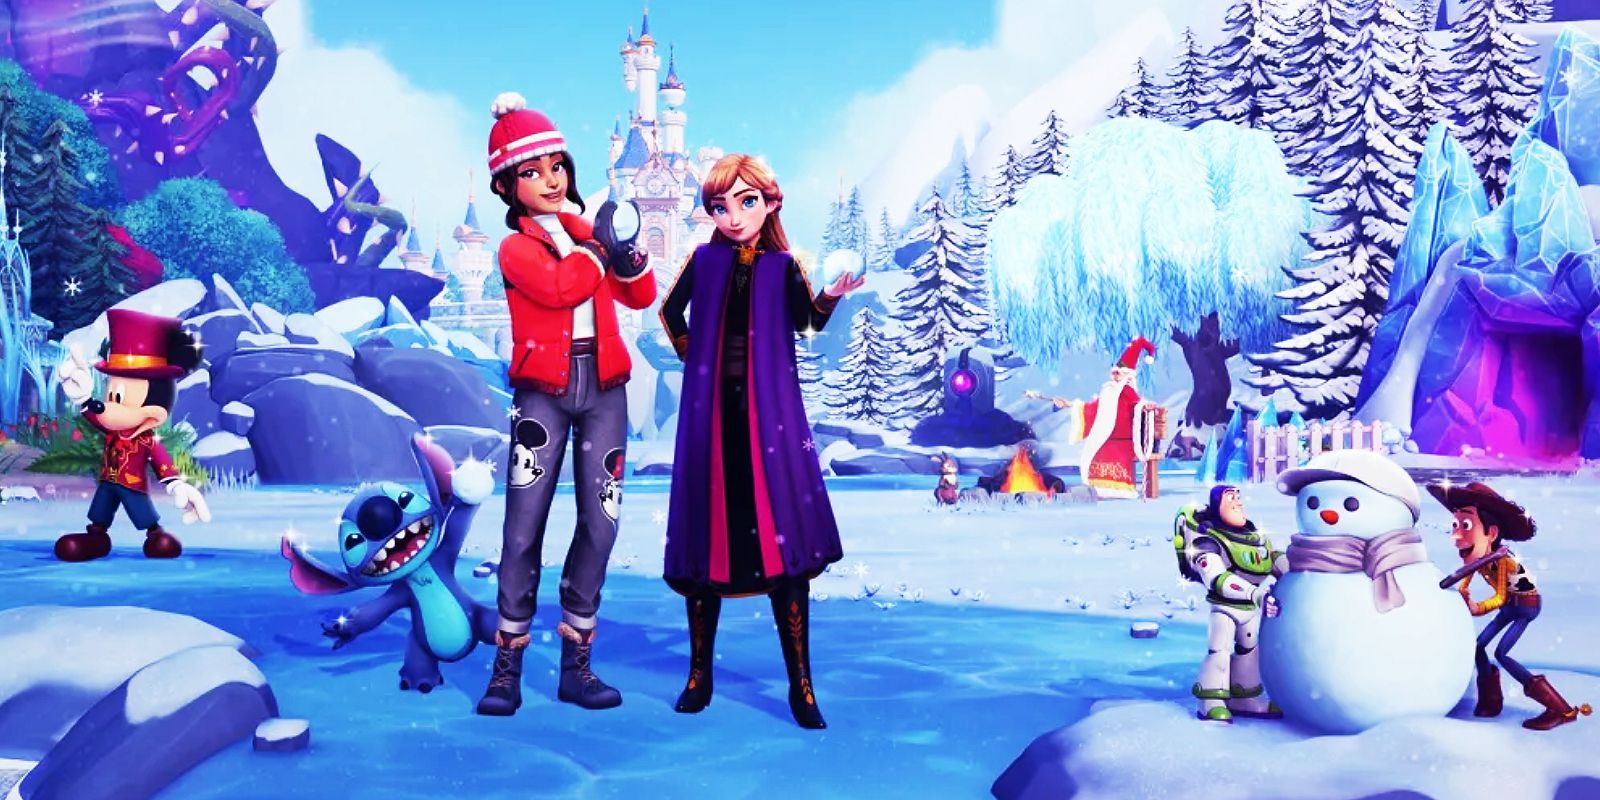 Disney Dreamlight Valley's Christmas update, including Merlin, Anna, Mickey, Stitch, Buzz, and Woody in winter attire.